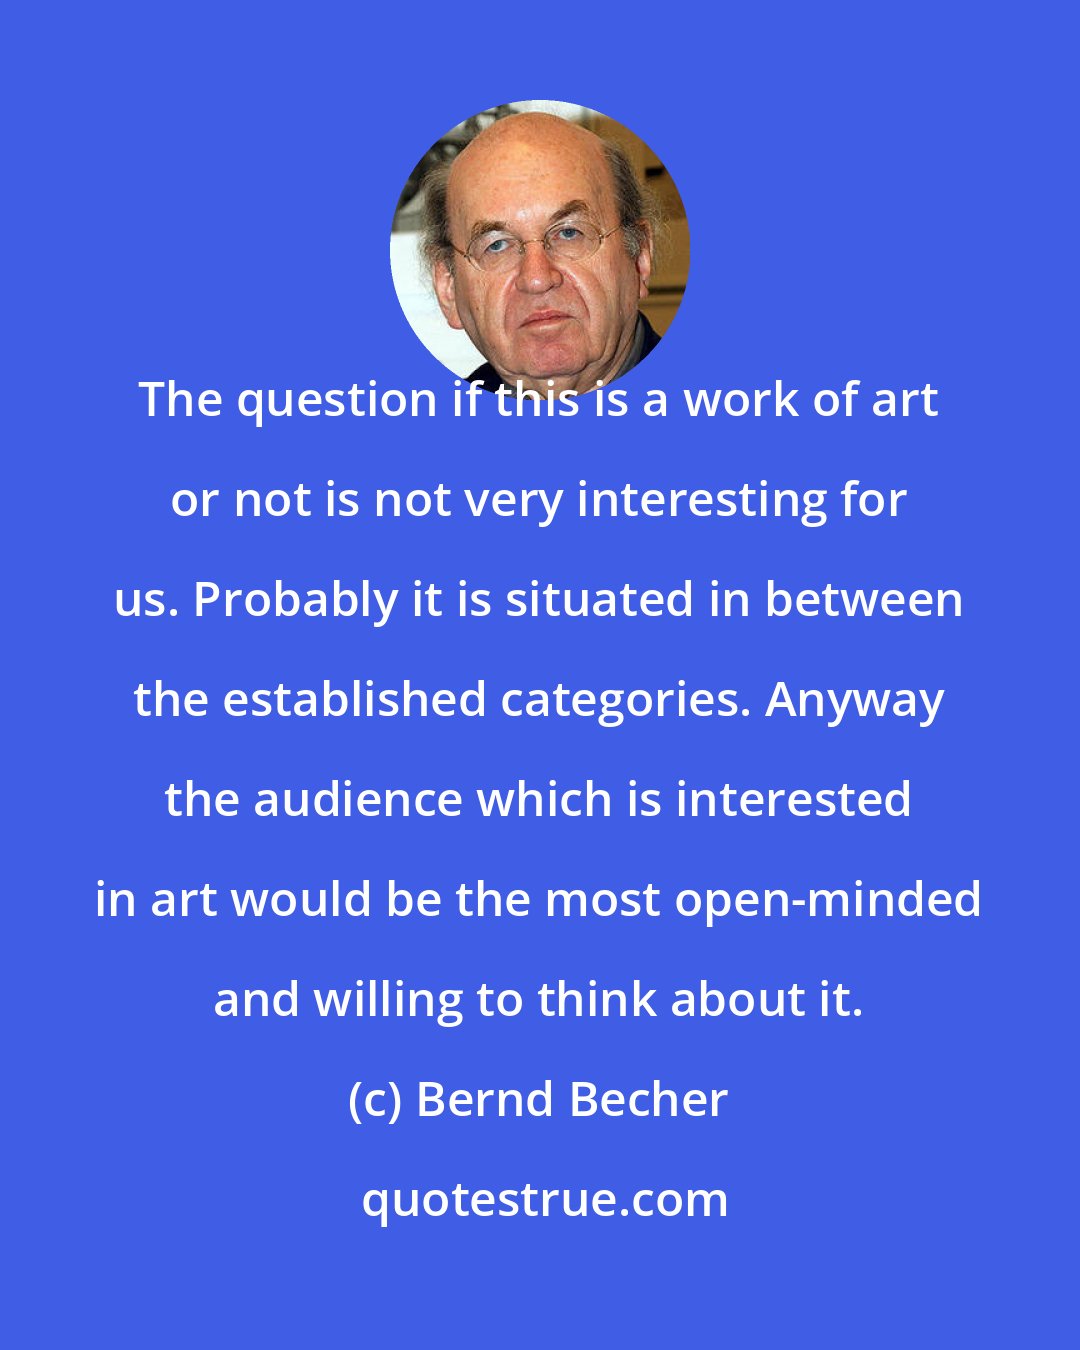 Bernd Becher: The question if this is a work of art or not is not very interesting for us. Probably it is situated in between the established categories. Anyway the audience which is interested in art would be the most open-minded and willing to think about it.